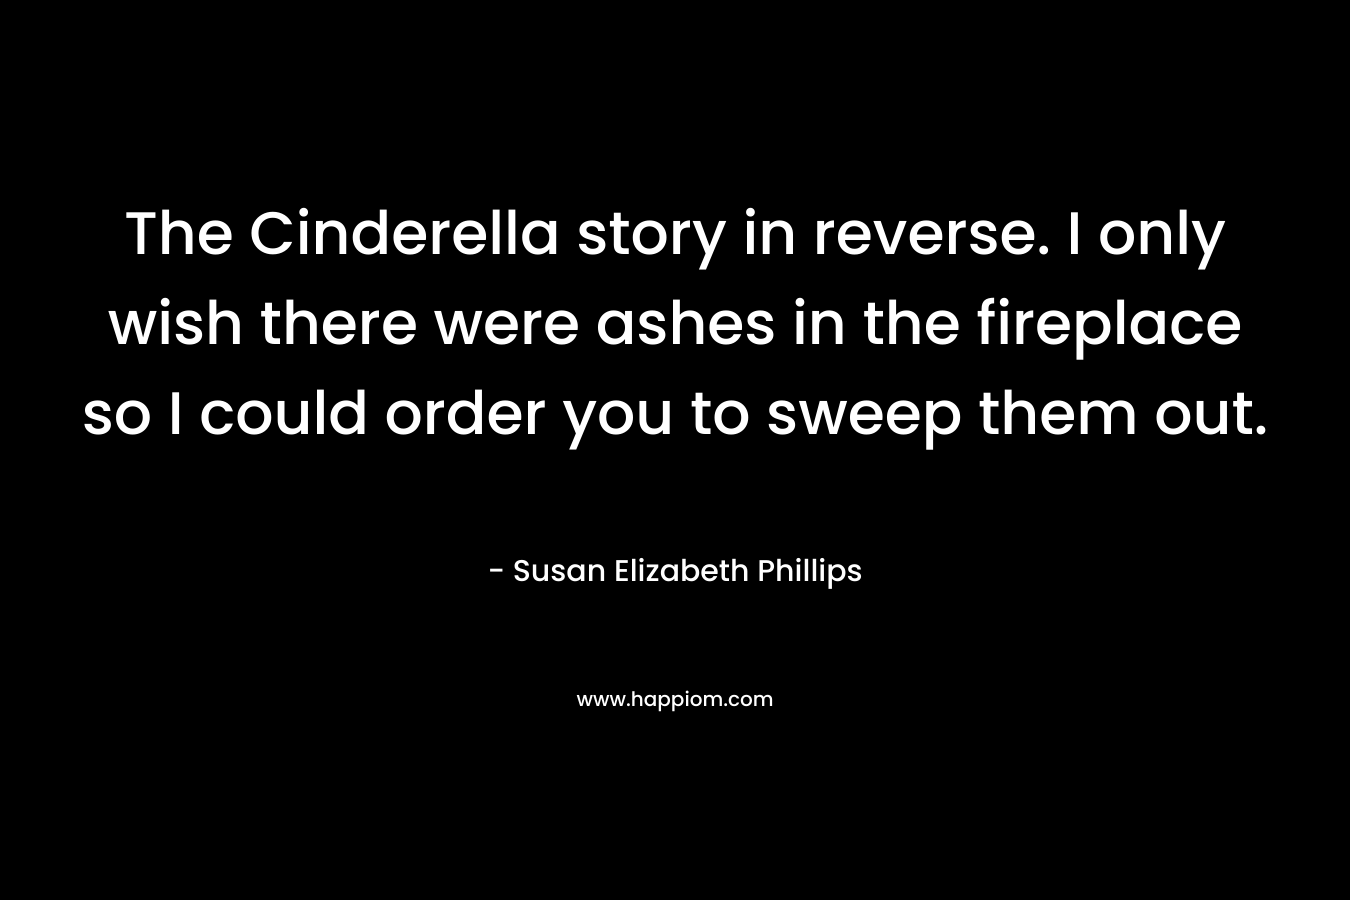 The Cinderella story in reverse. I only wish there were ashes in the fireplace so I could order you to sweep them out.